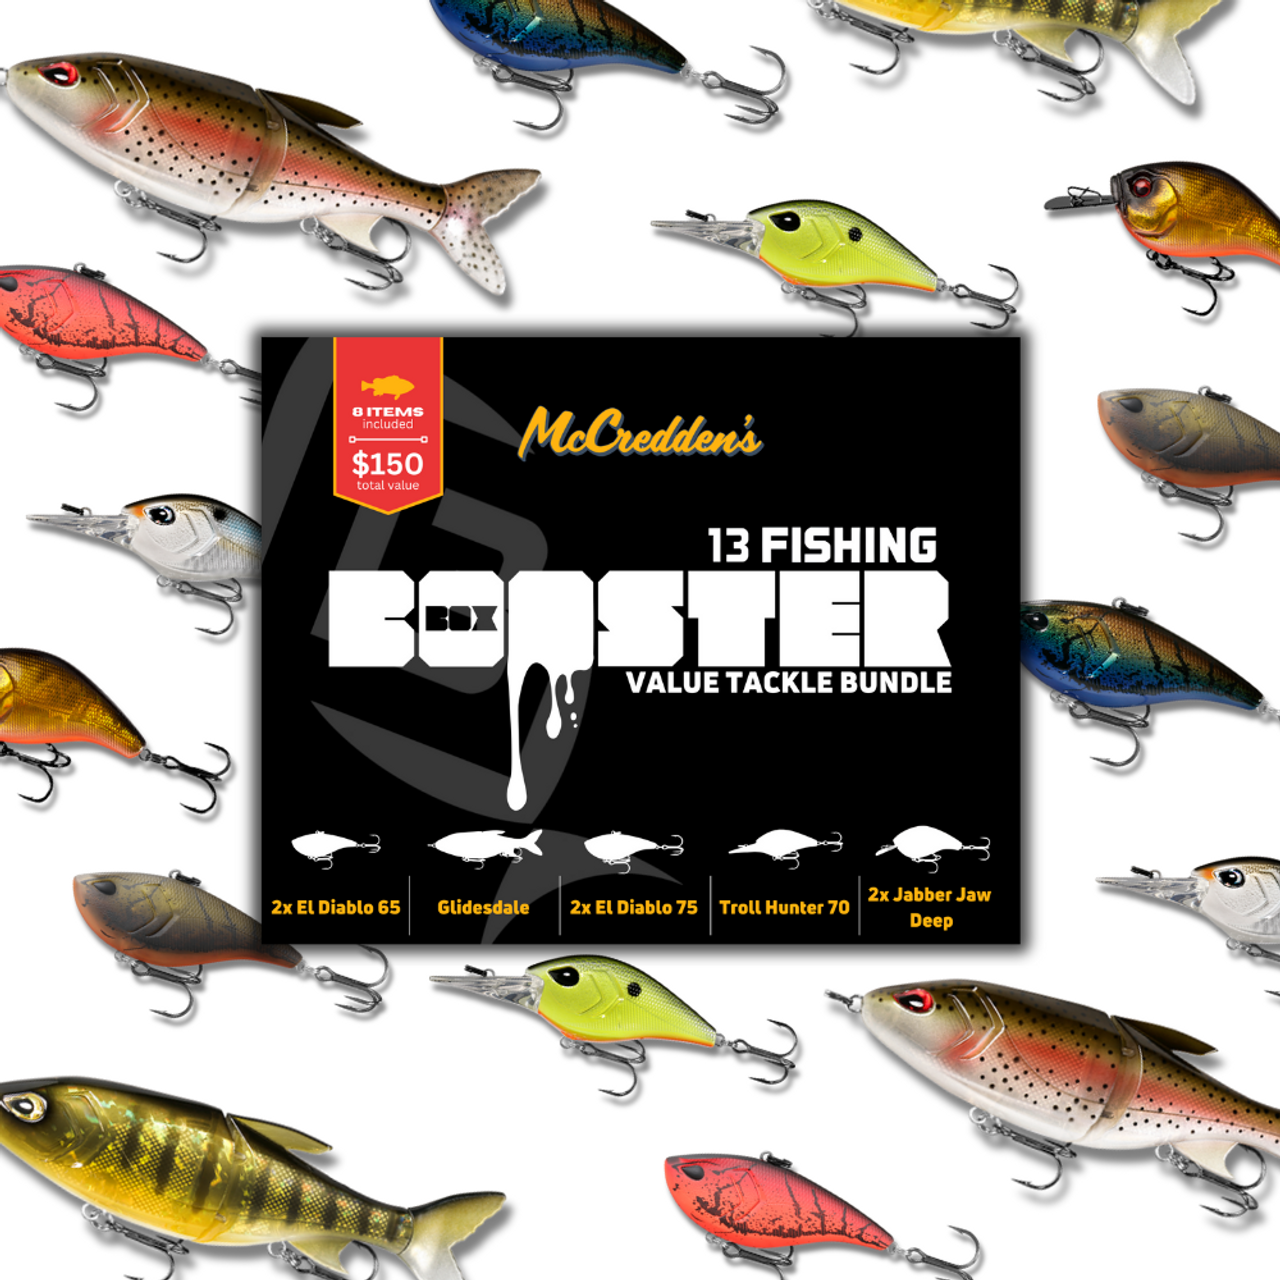 Booster Box - 13 Fishing VALUE Tackle Bundle - McCredden's